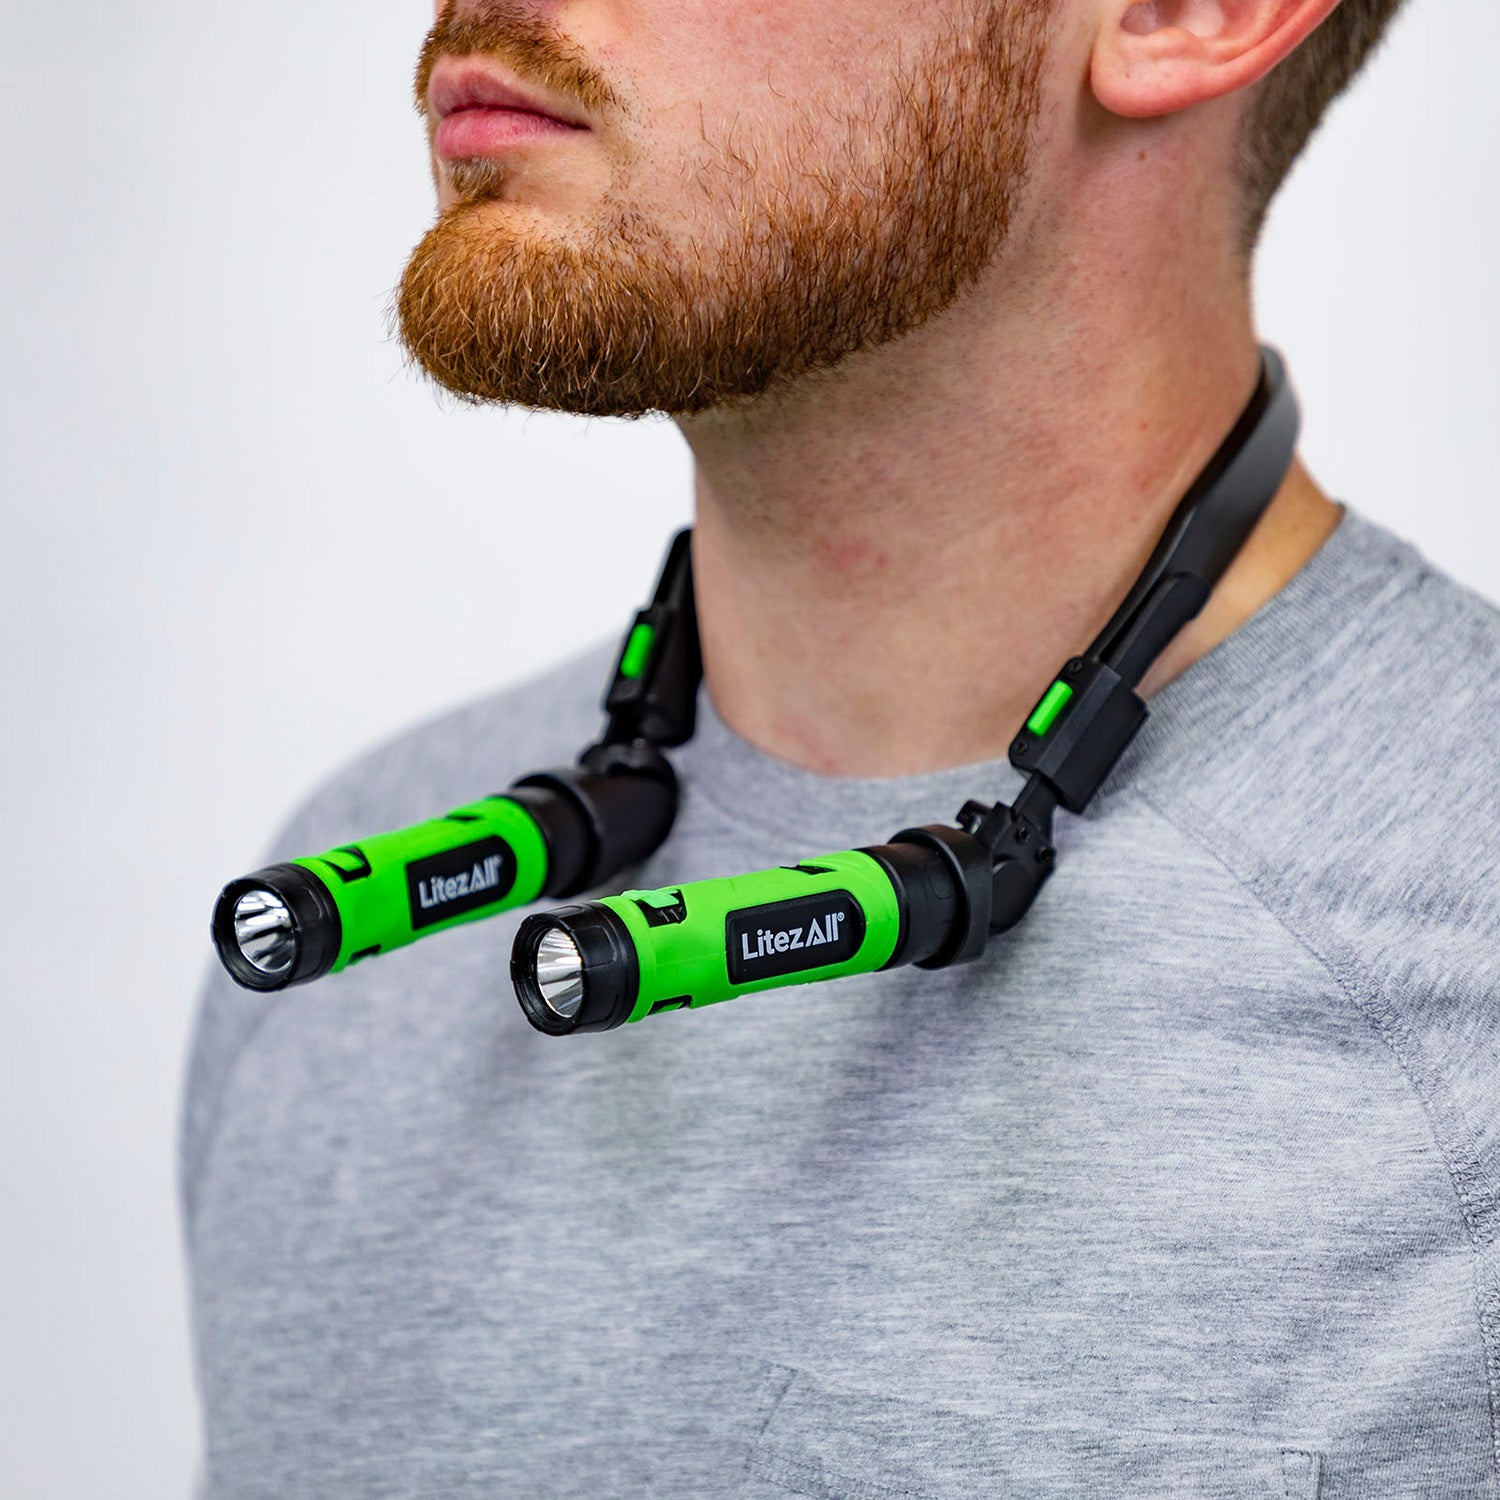 LitezAll 25515 Rechargeable Neck Light in Action